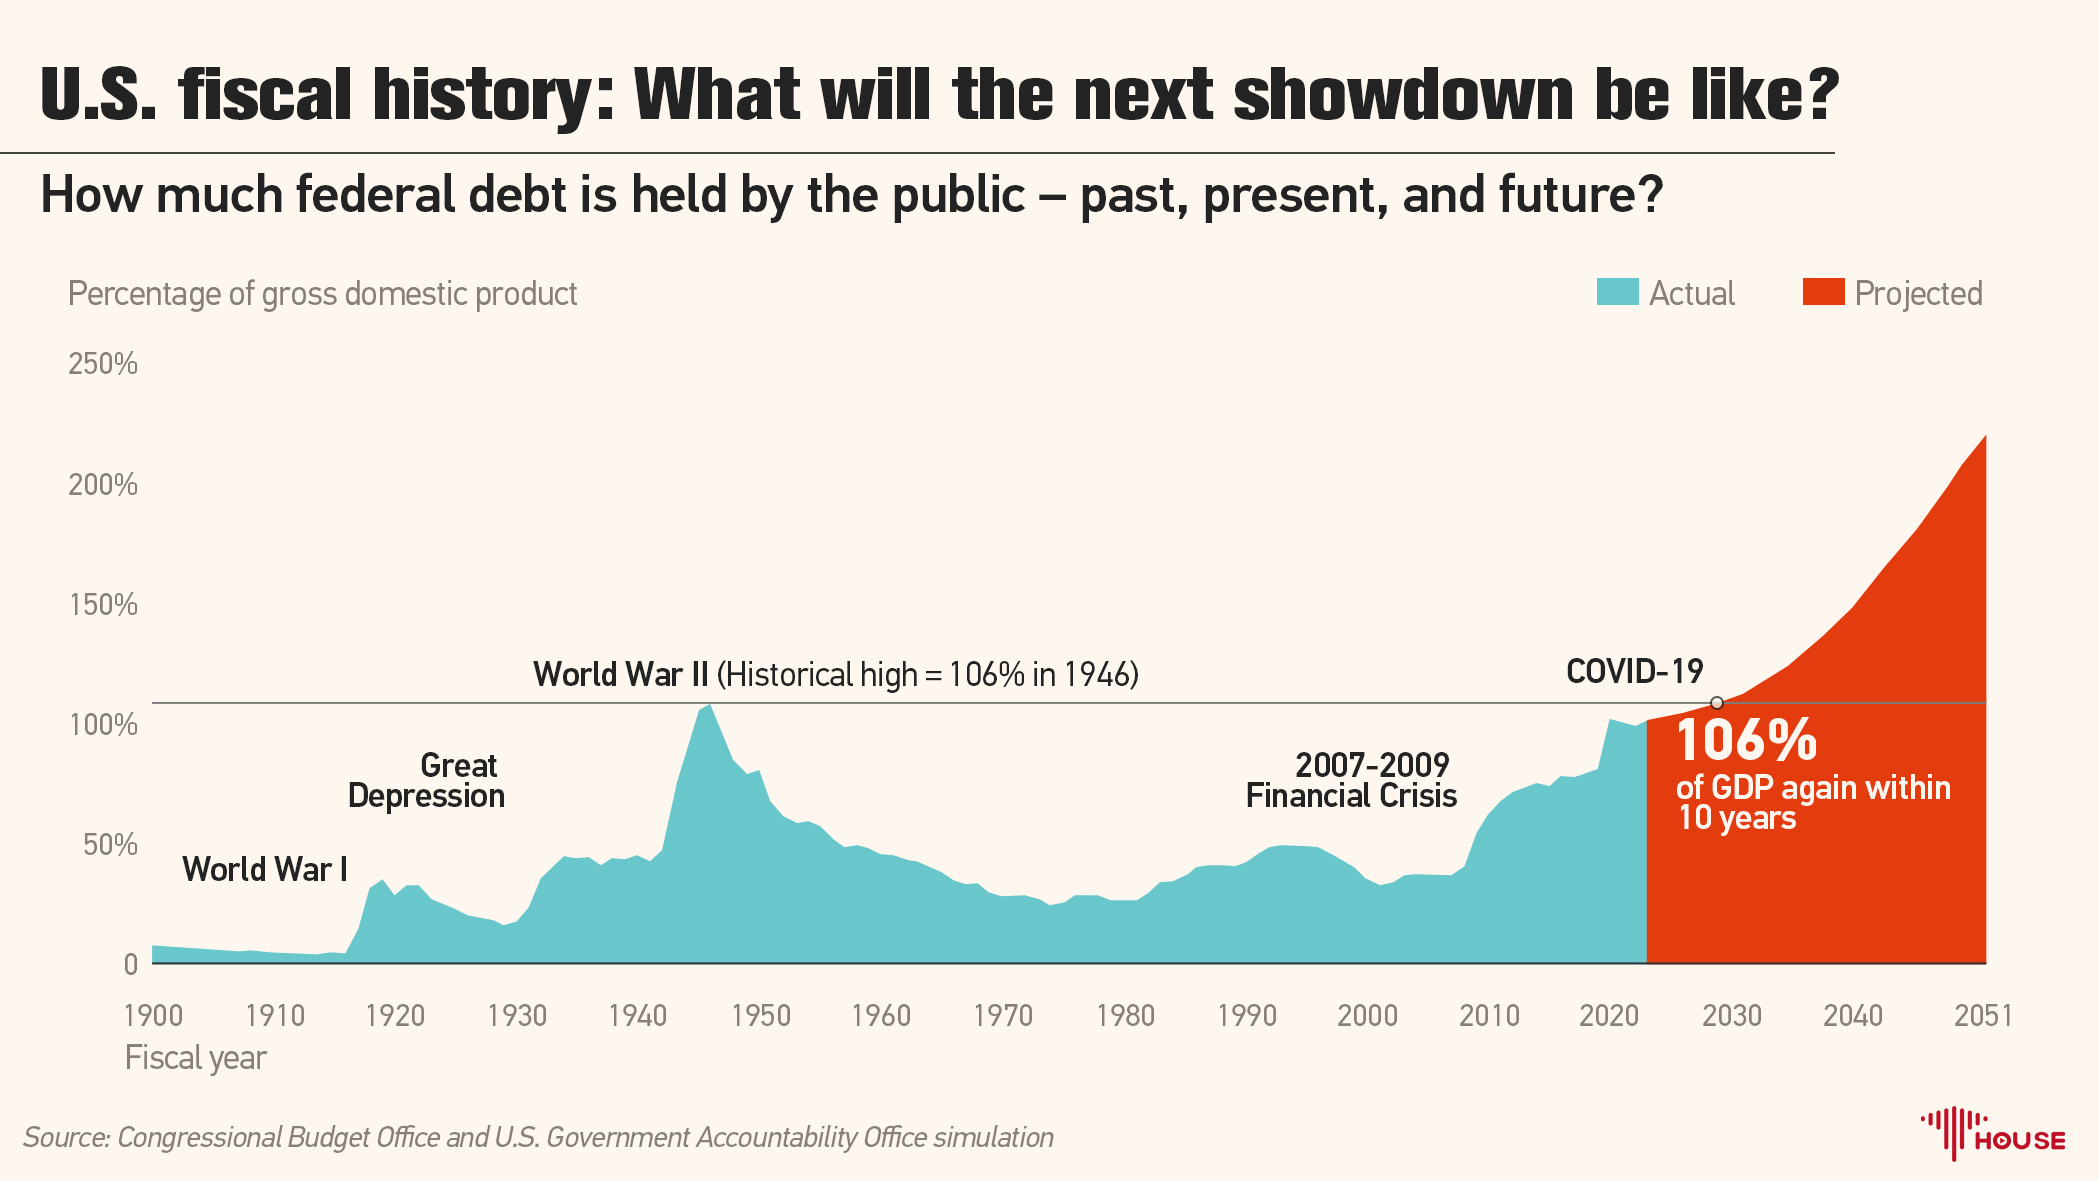 U.S. fiscal history: What will the next showdown be like?